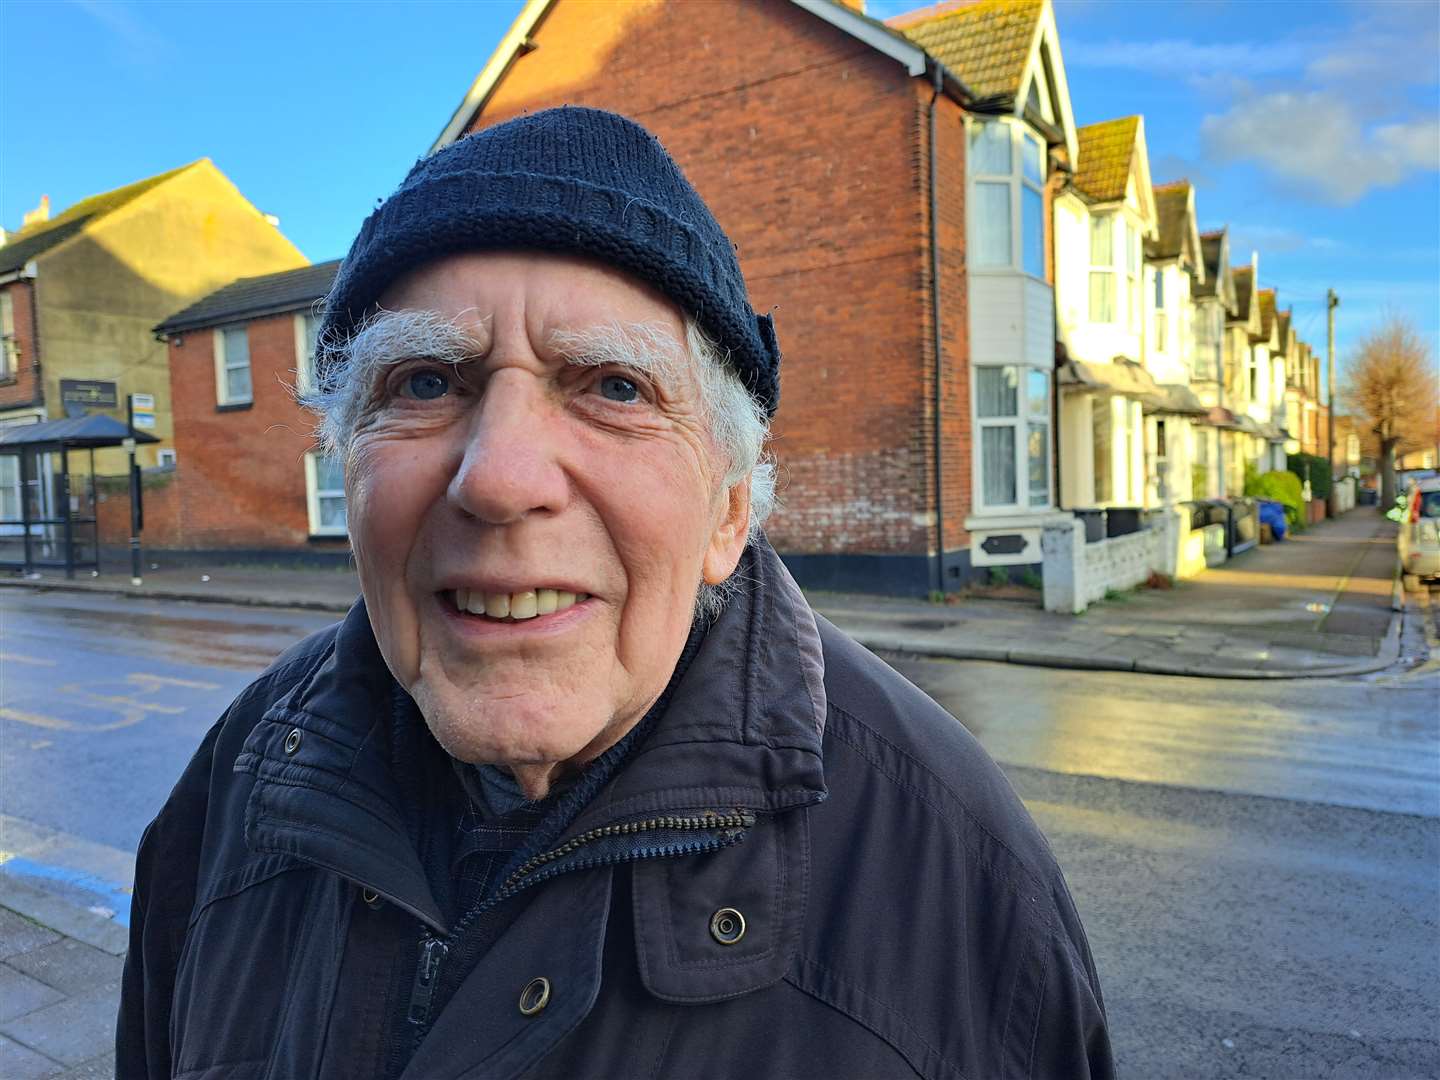 David Smith, 84, said that people would get used to the new road layout and the Herne Bay plaza could be good for the town